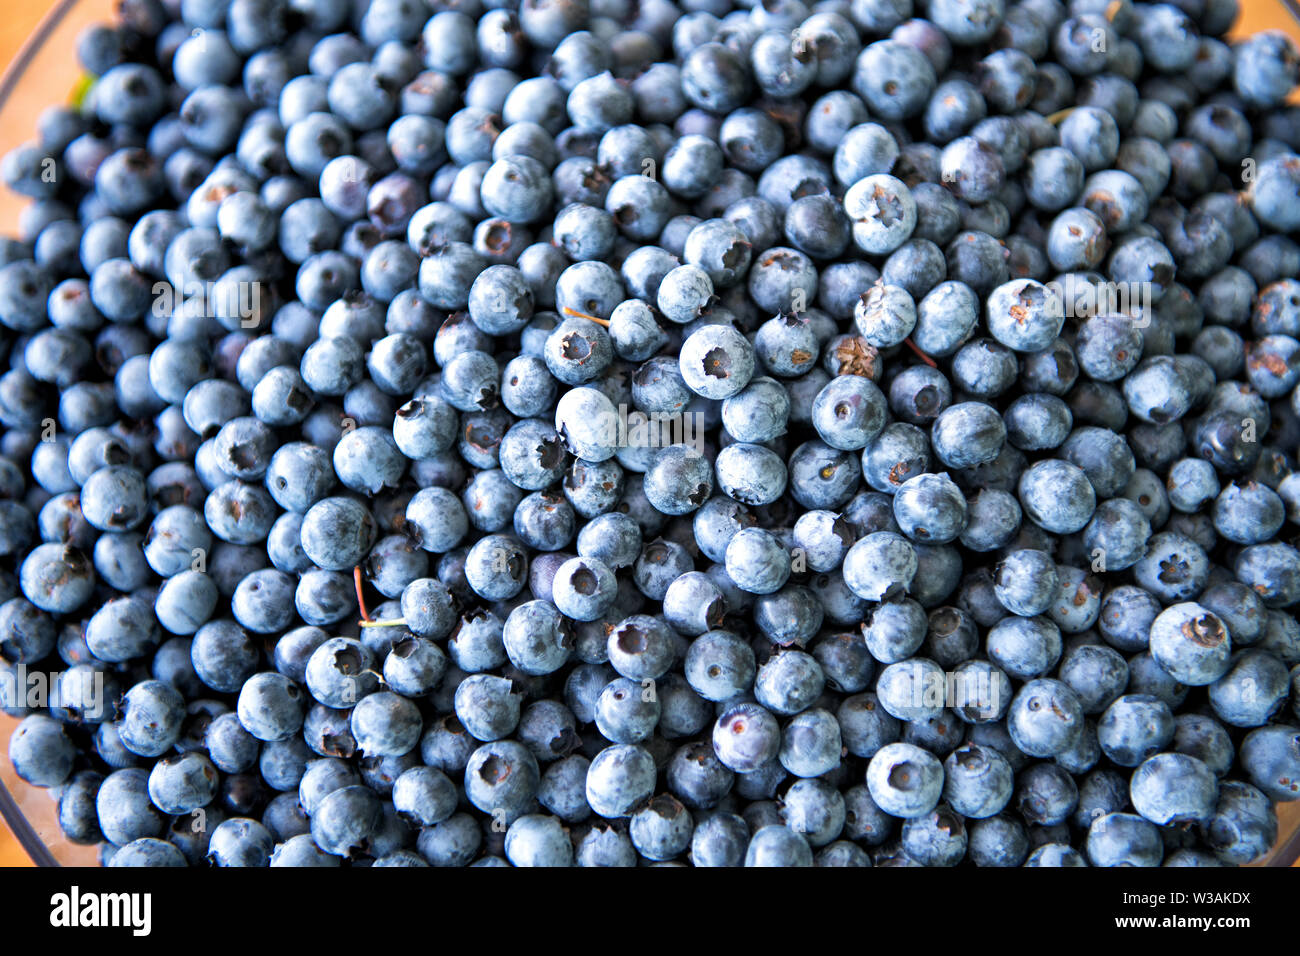 Background texture of freshly picked ripe blueberries in a glass bowl a healthy agricultural crop or home grown summer harvest rich in vitamin C Stock Photo